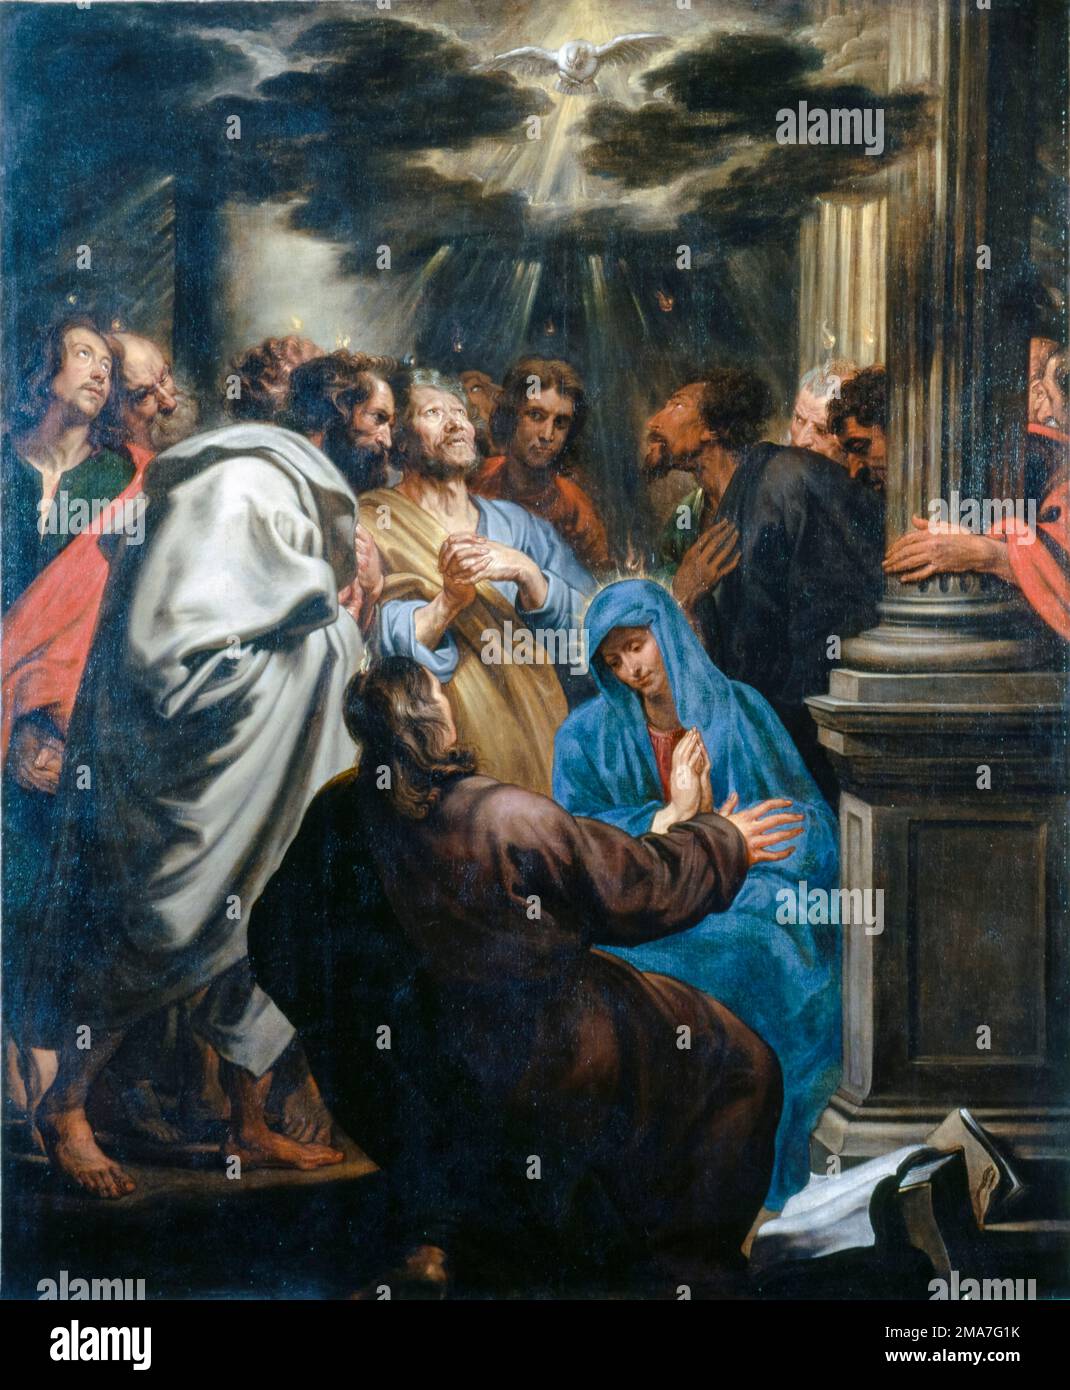 Anthony van Dyck, Pentecost: The Holy Ghost descends upon Mary and the Apostles, painting in oil on canvas, 1618-1620 Stock Photo